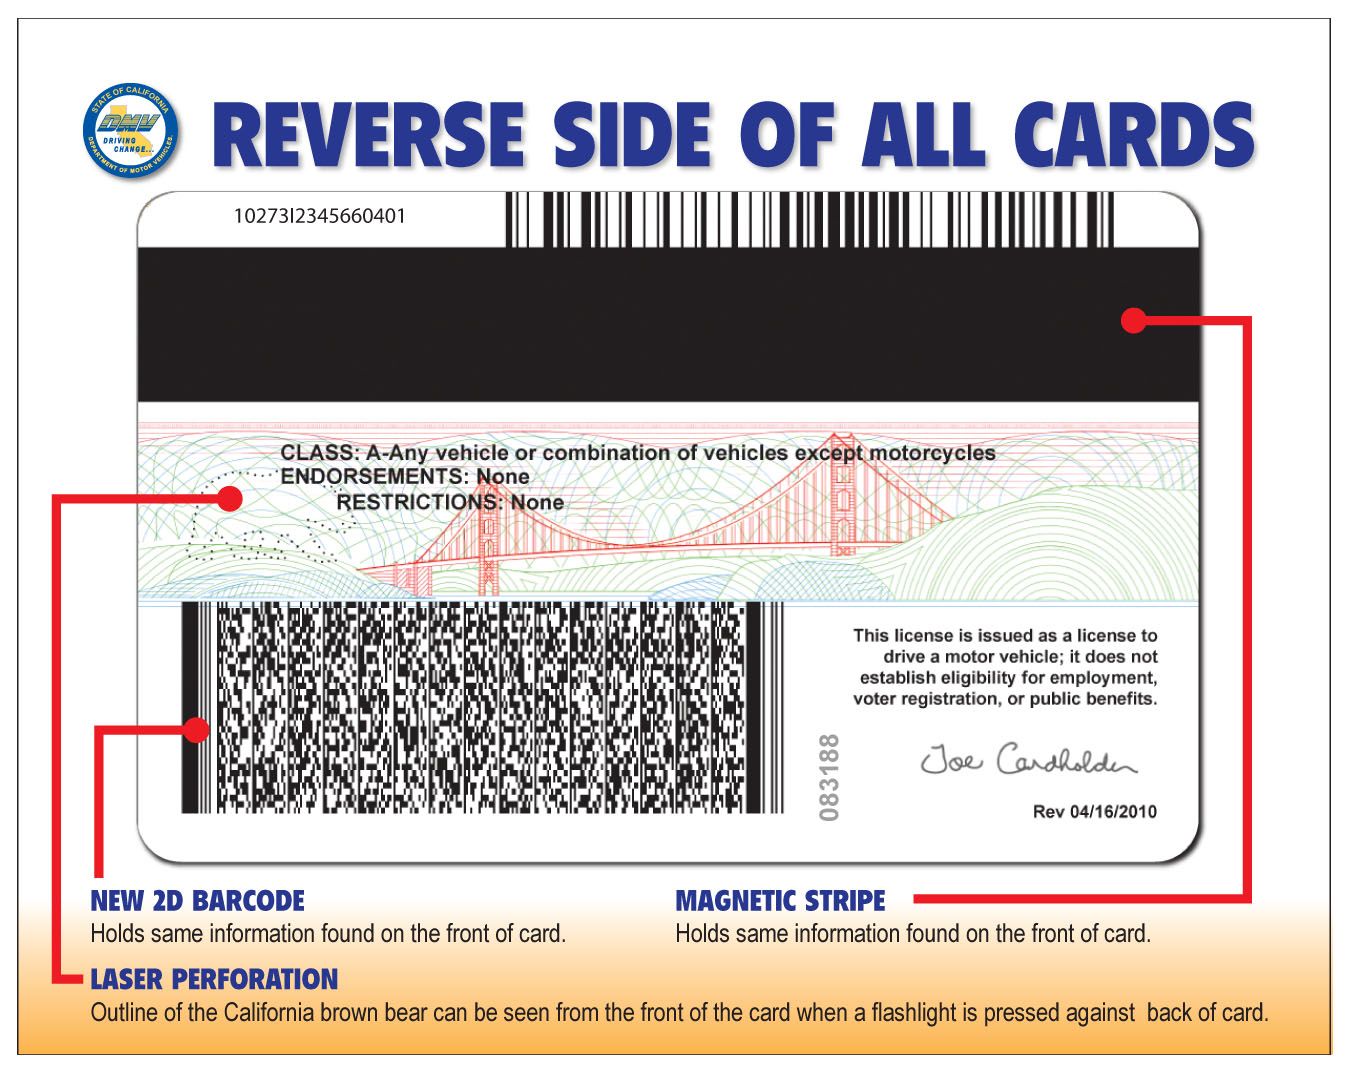 California Drivers License Barcode Format software, free download